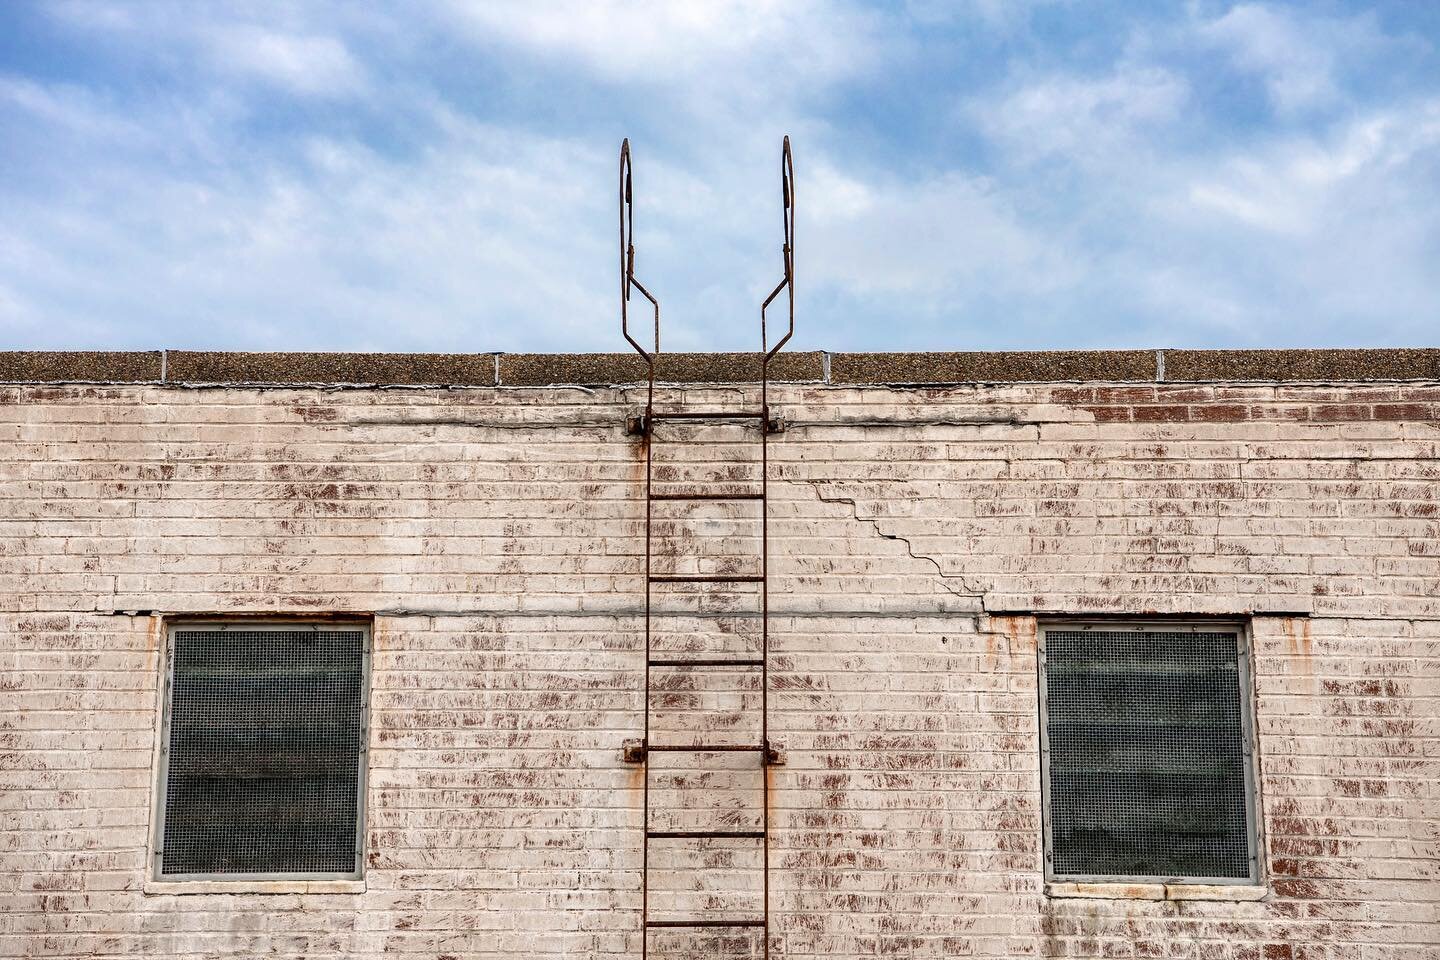 This ladder goes up to the roof of the mechanical room, but all I see is a pool ladder. From the rooftop of 222 Mitchell Street for @southdwntn, previously a C&amp;S Bank office building.